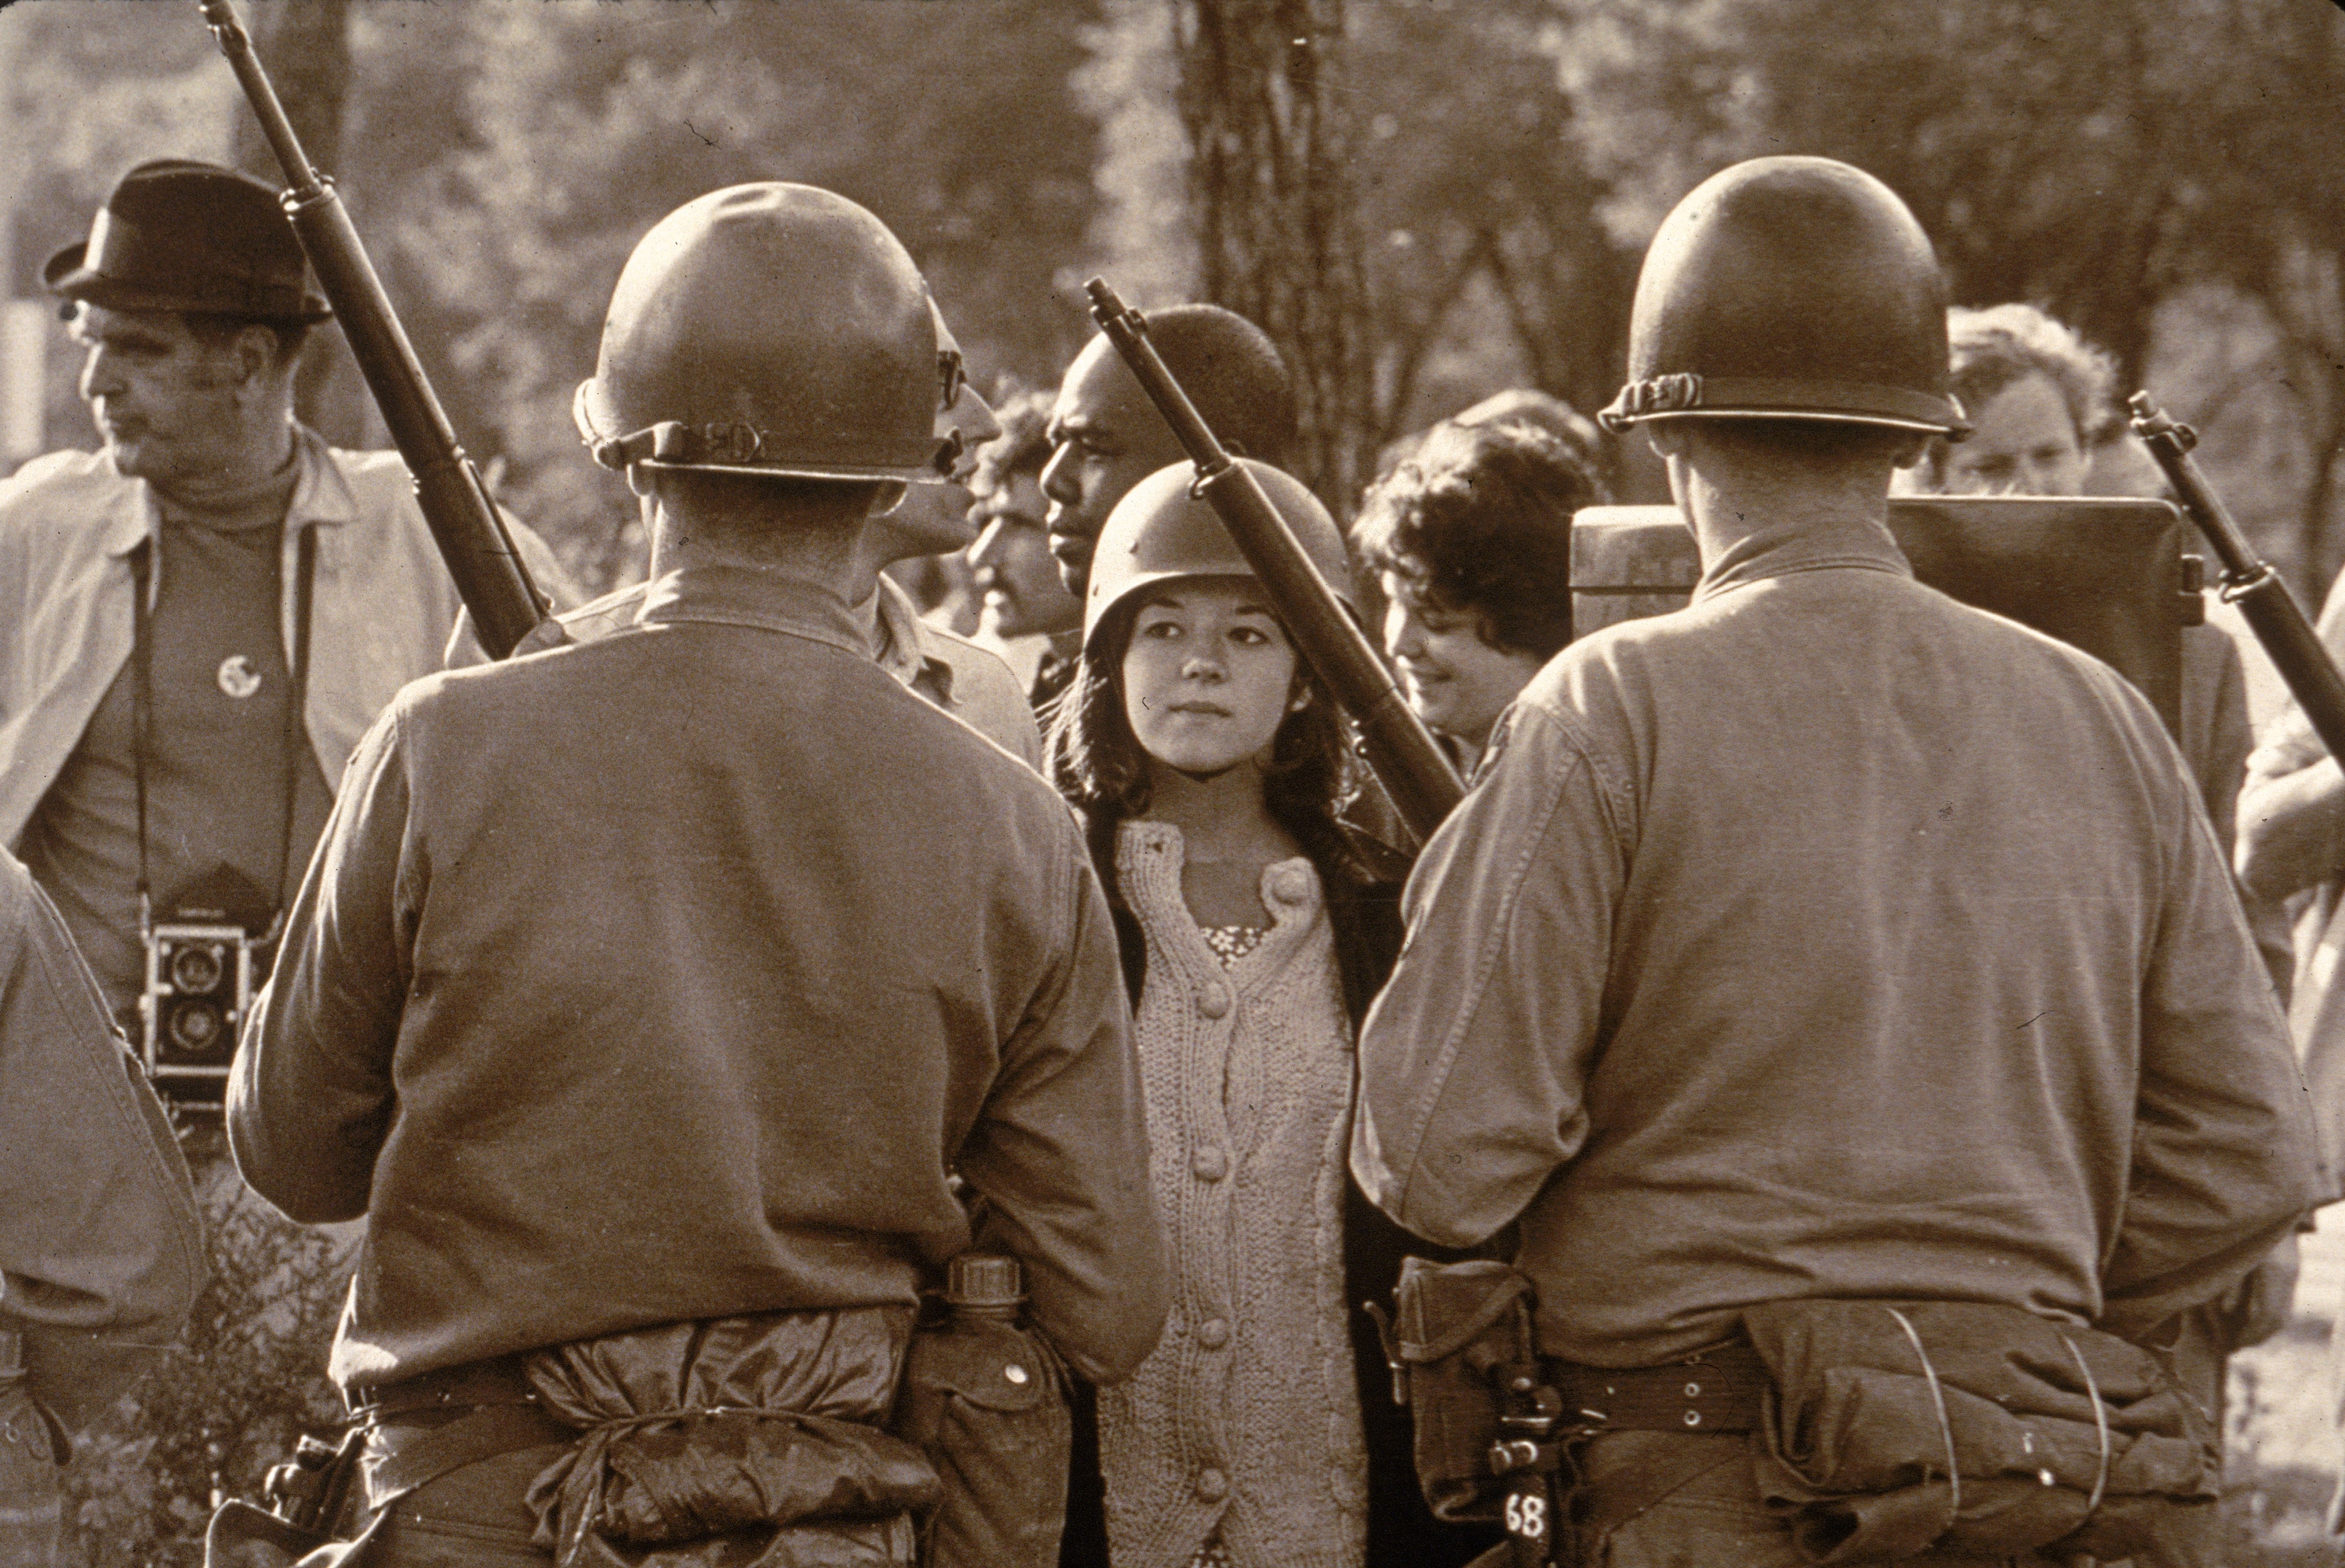 A young female protester wearing faces down helmeted and armed police officers at an anti-Vietnam War demonstration outside the 1968 Democratic National Convention in Chicago, Illinois, during August 1968